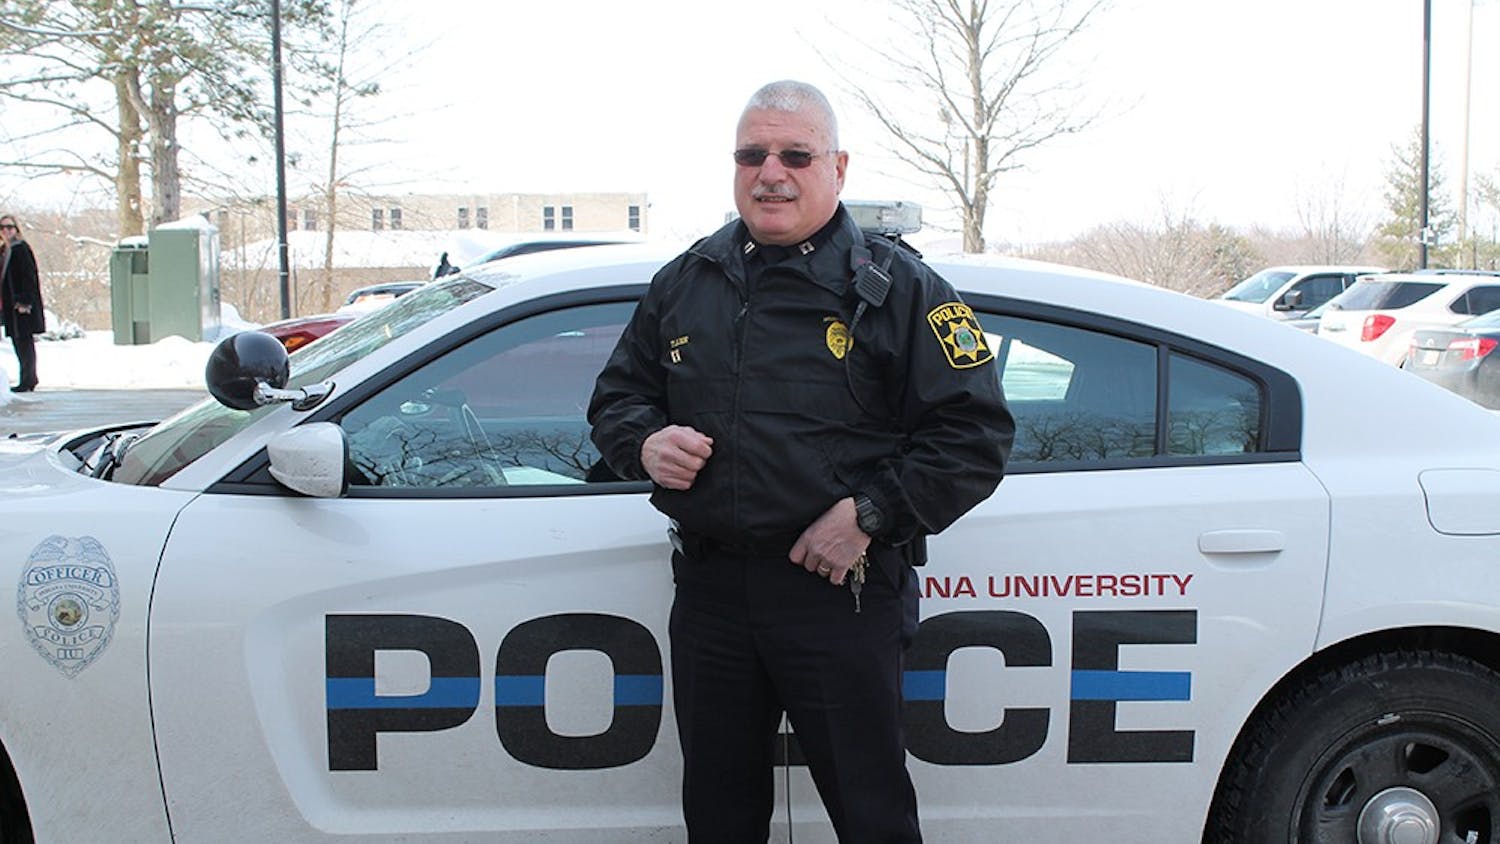 Captain of Operations Tom Lee stands in front of a police car on March 2, 2015. Lee has been on IU's police force for 19 years.